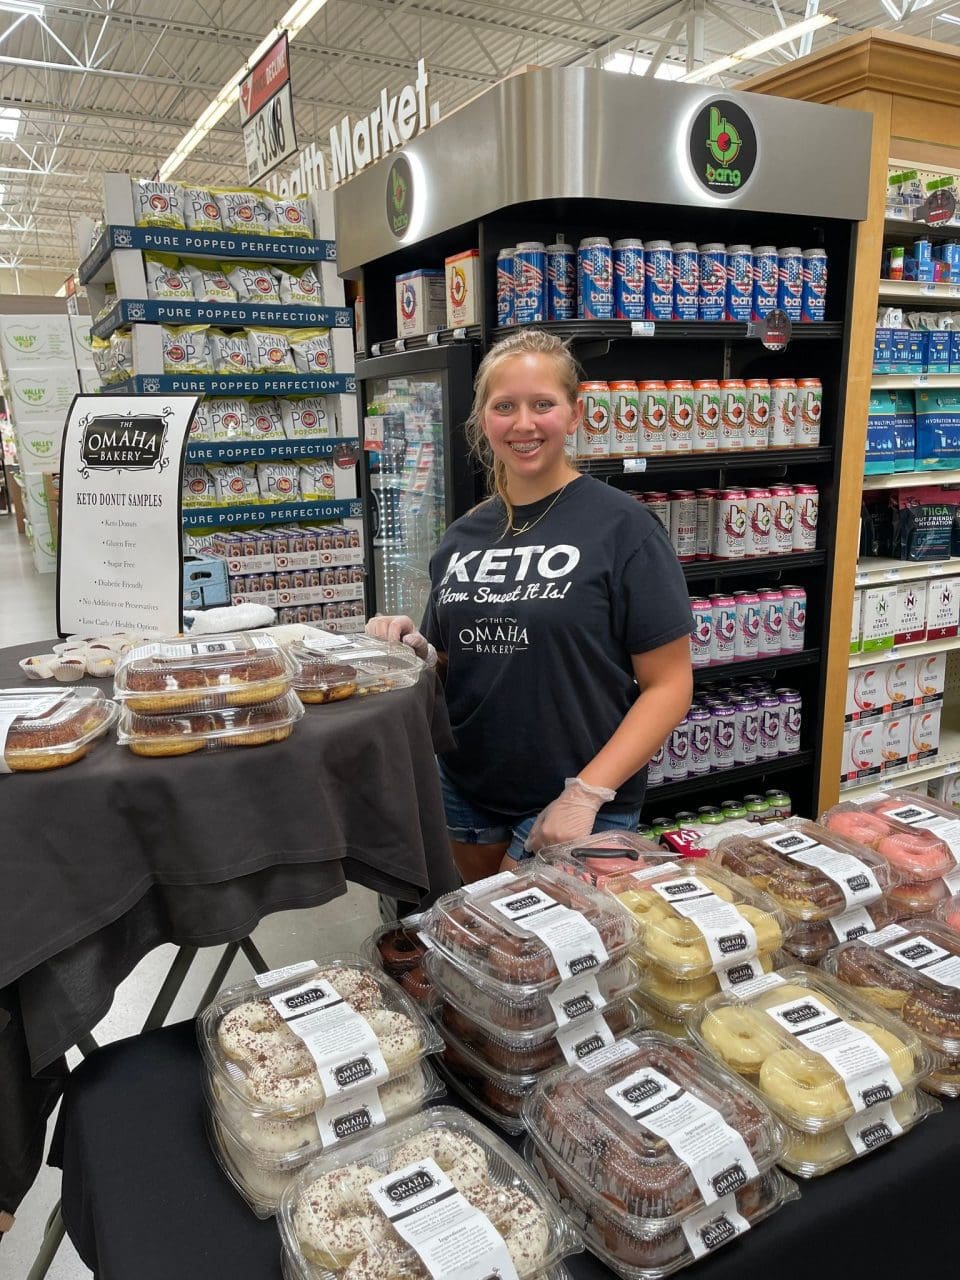 young woman wearing an omaha bakery tee standing next to a display of keto donuts at hy-vee